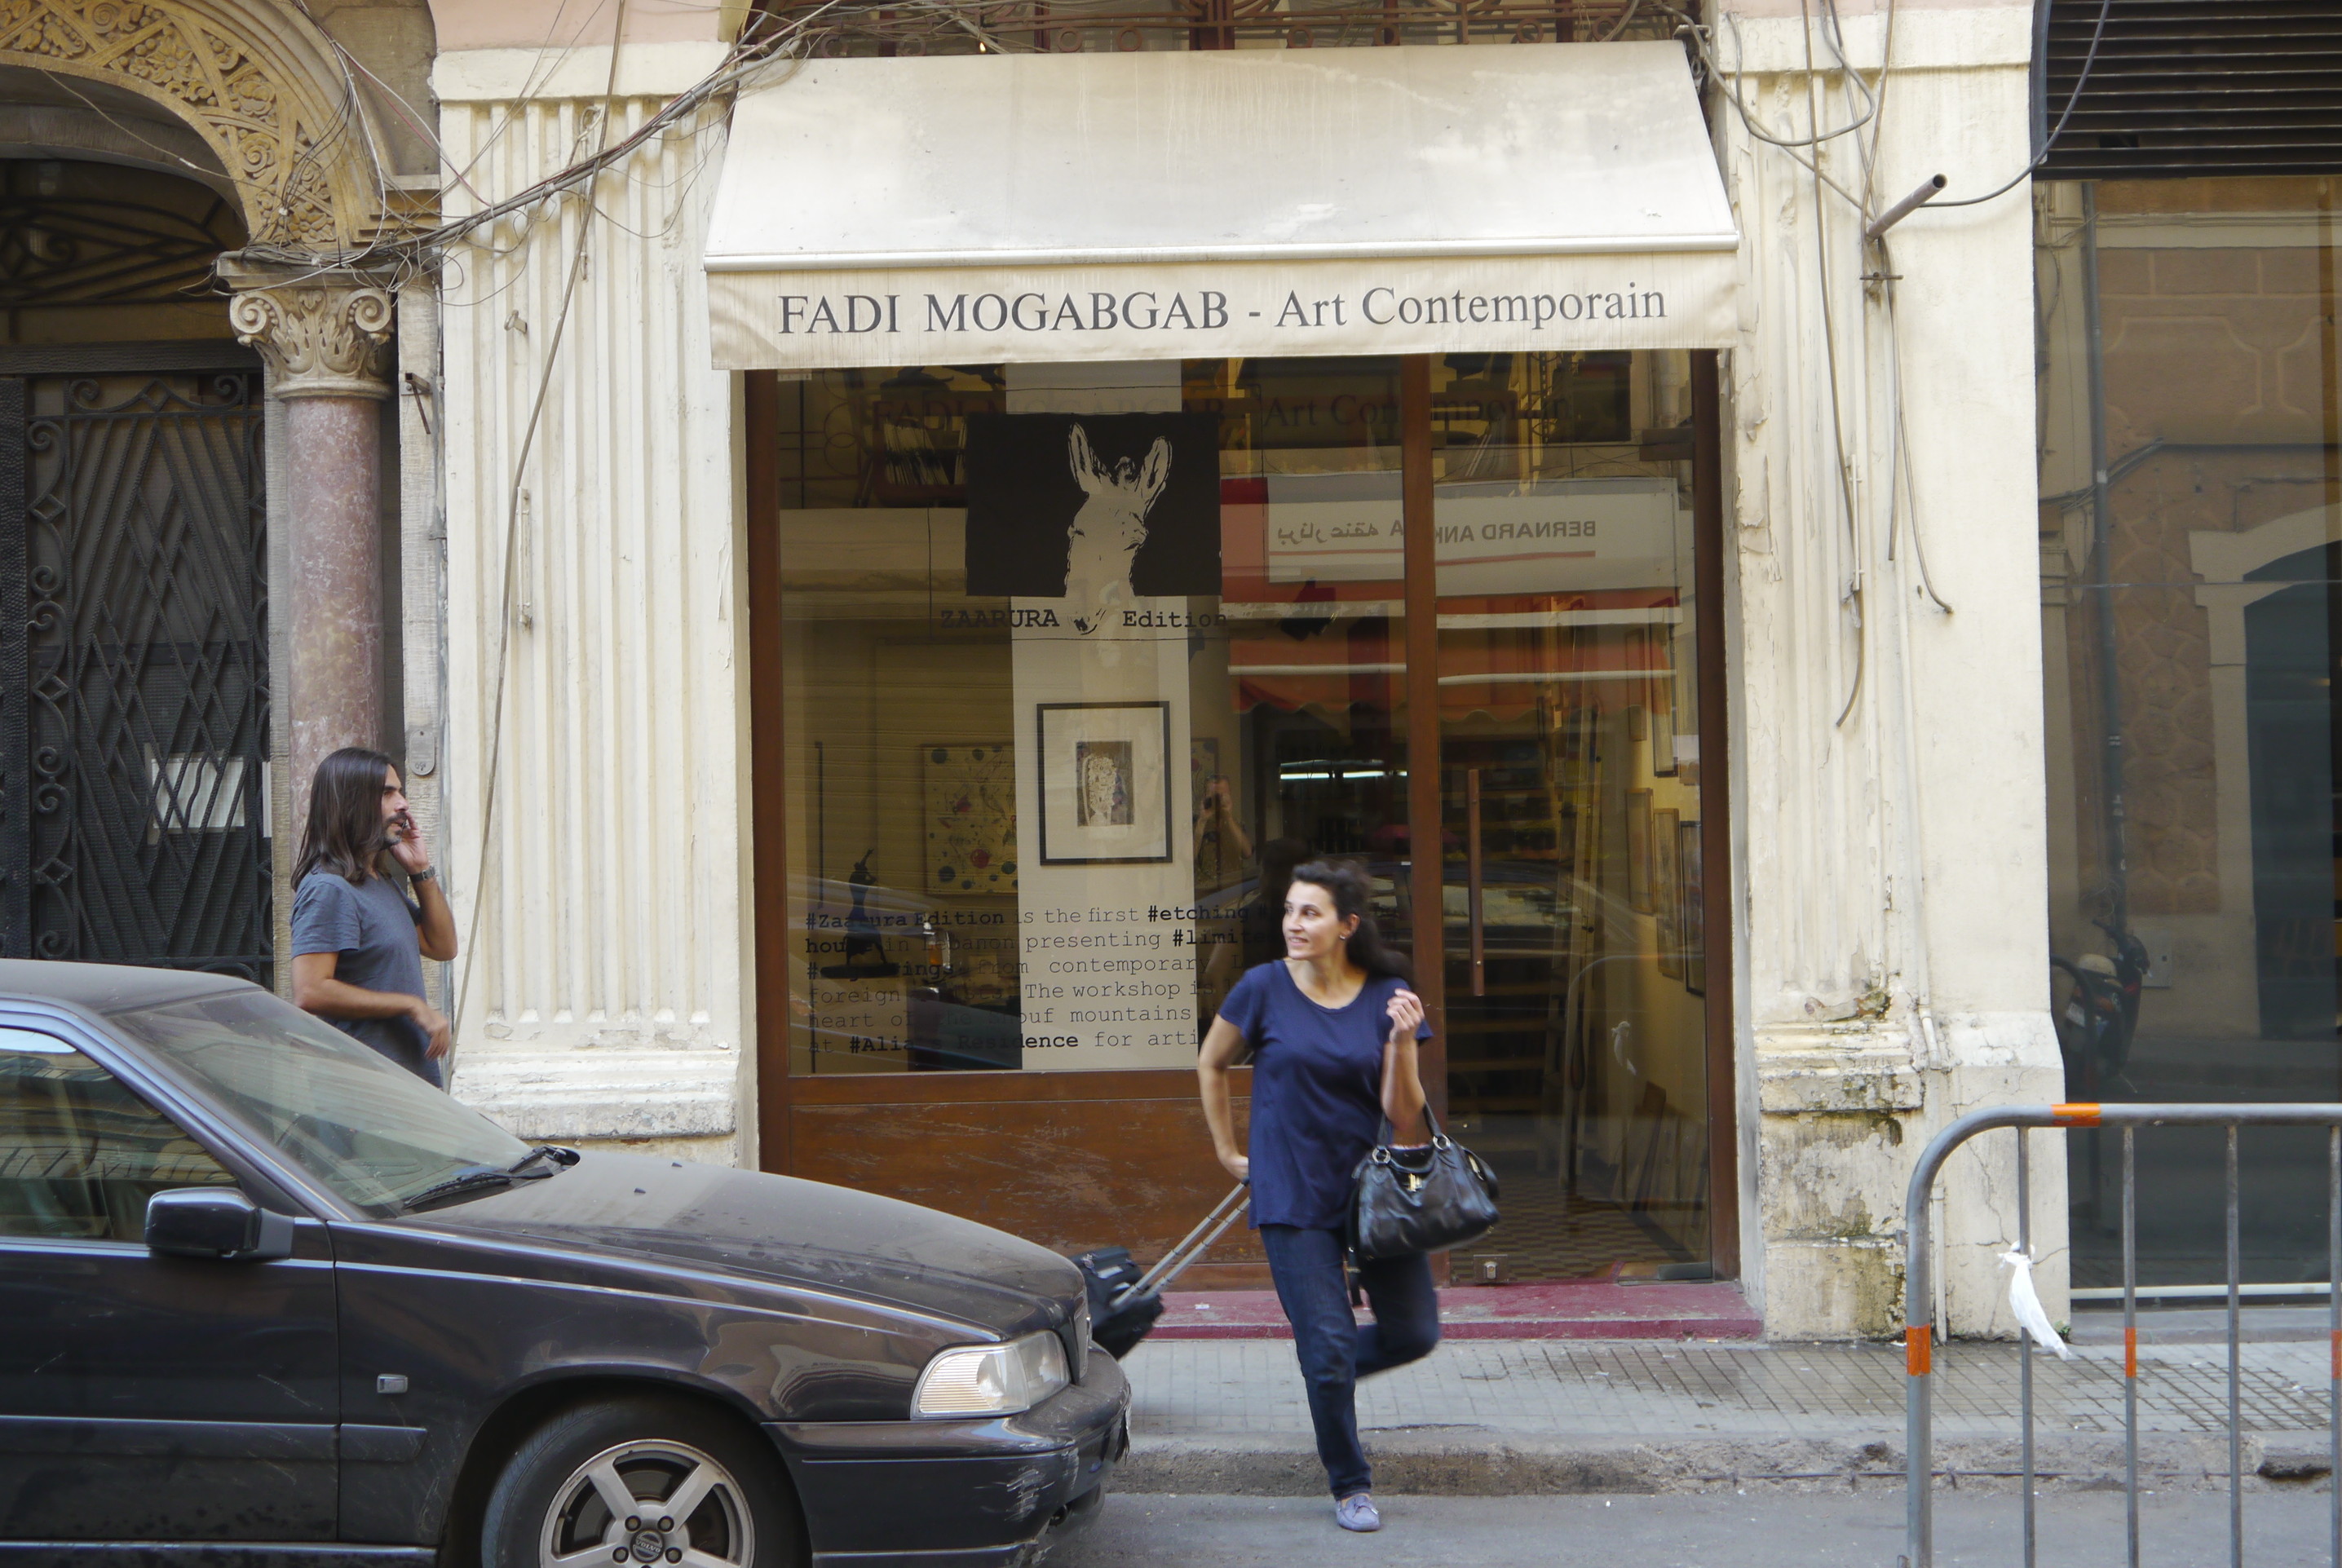 Fady Mogabgab's Zaarura art gallery is the first in Beirut to restore attention to the art of etching